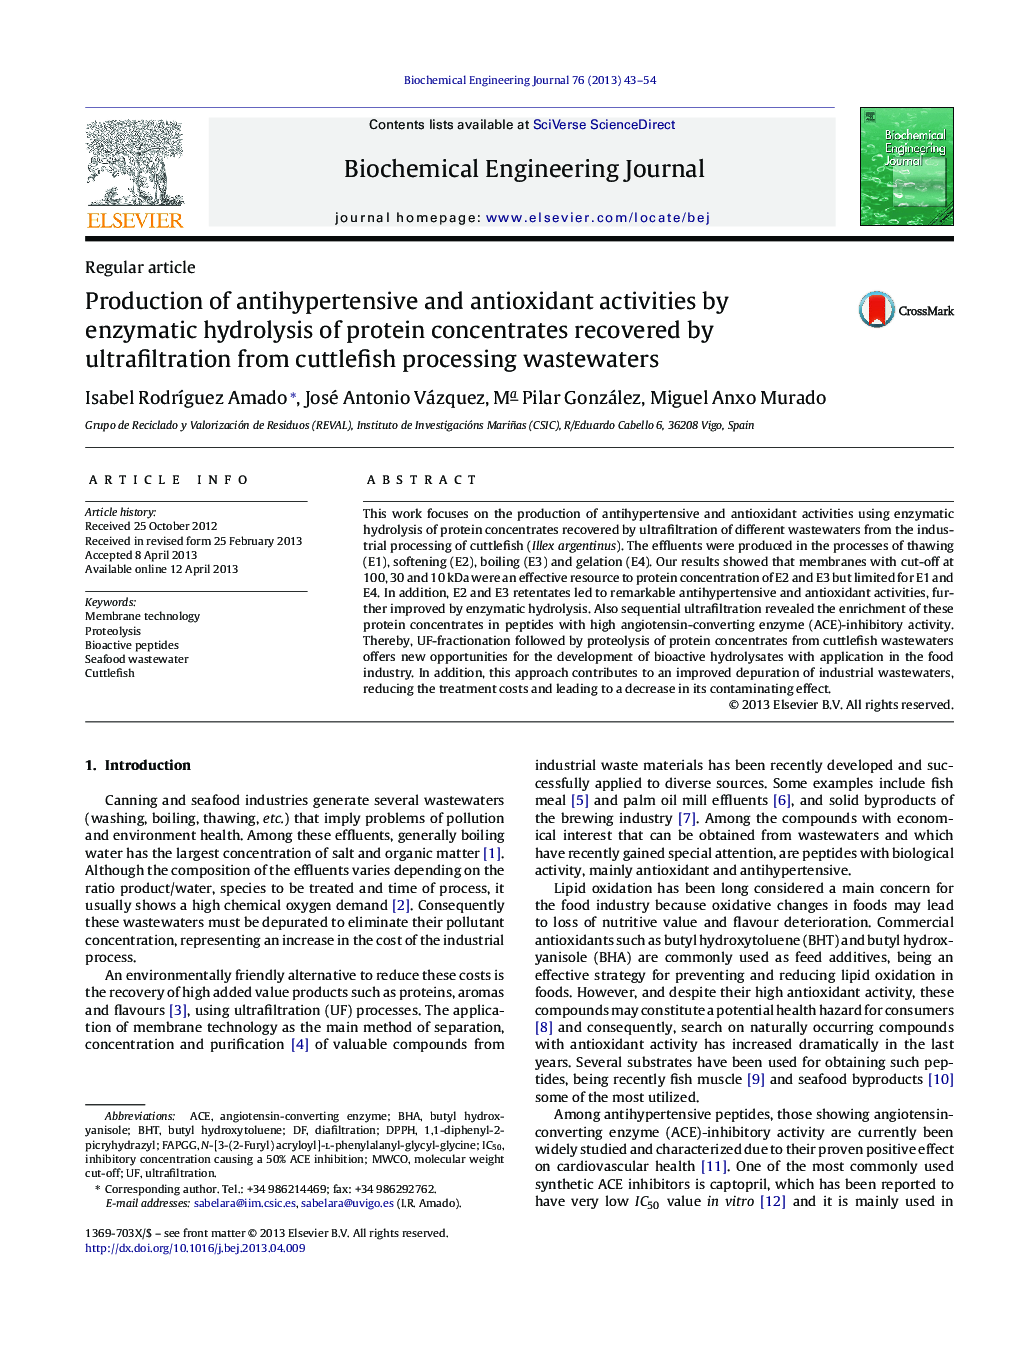 Production of antihypertensive and antioxidant activities by enzymatic hydrolysis of protein concentrates recovered by ultrafiltration from cuttlefish processing wastewaters